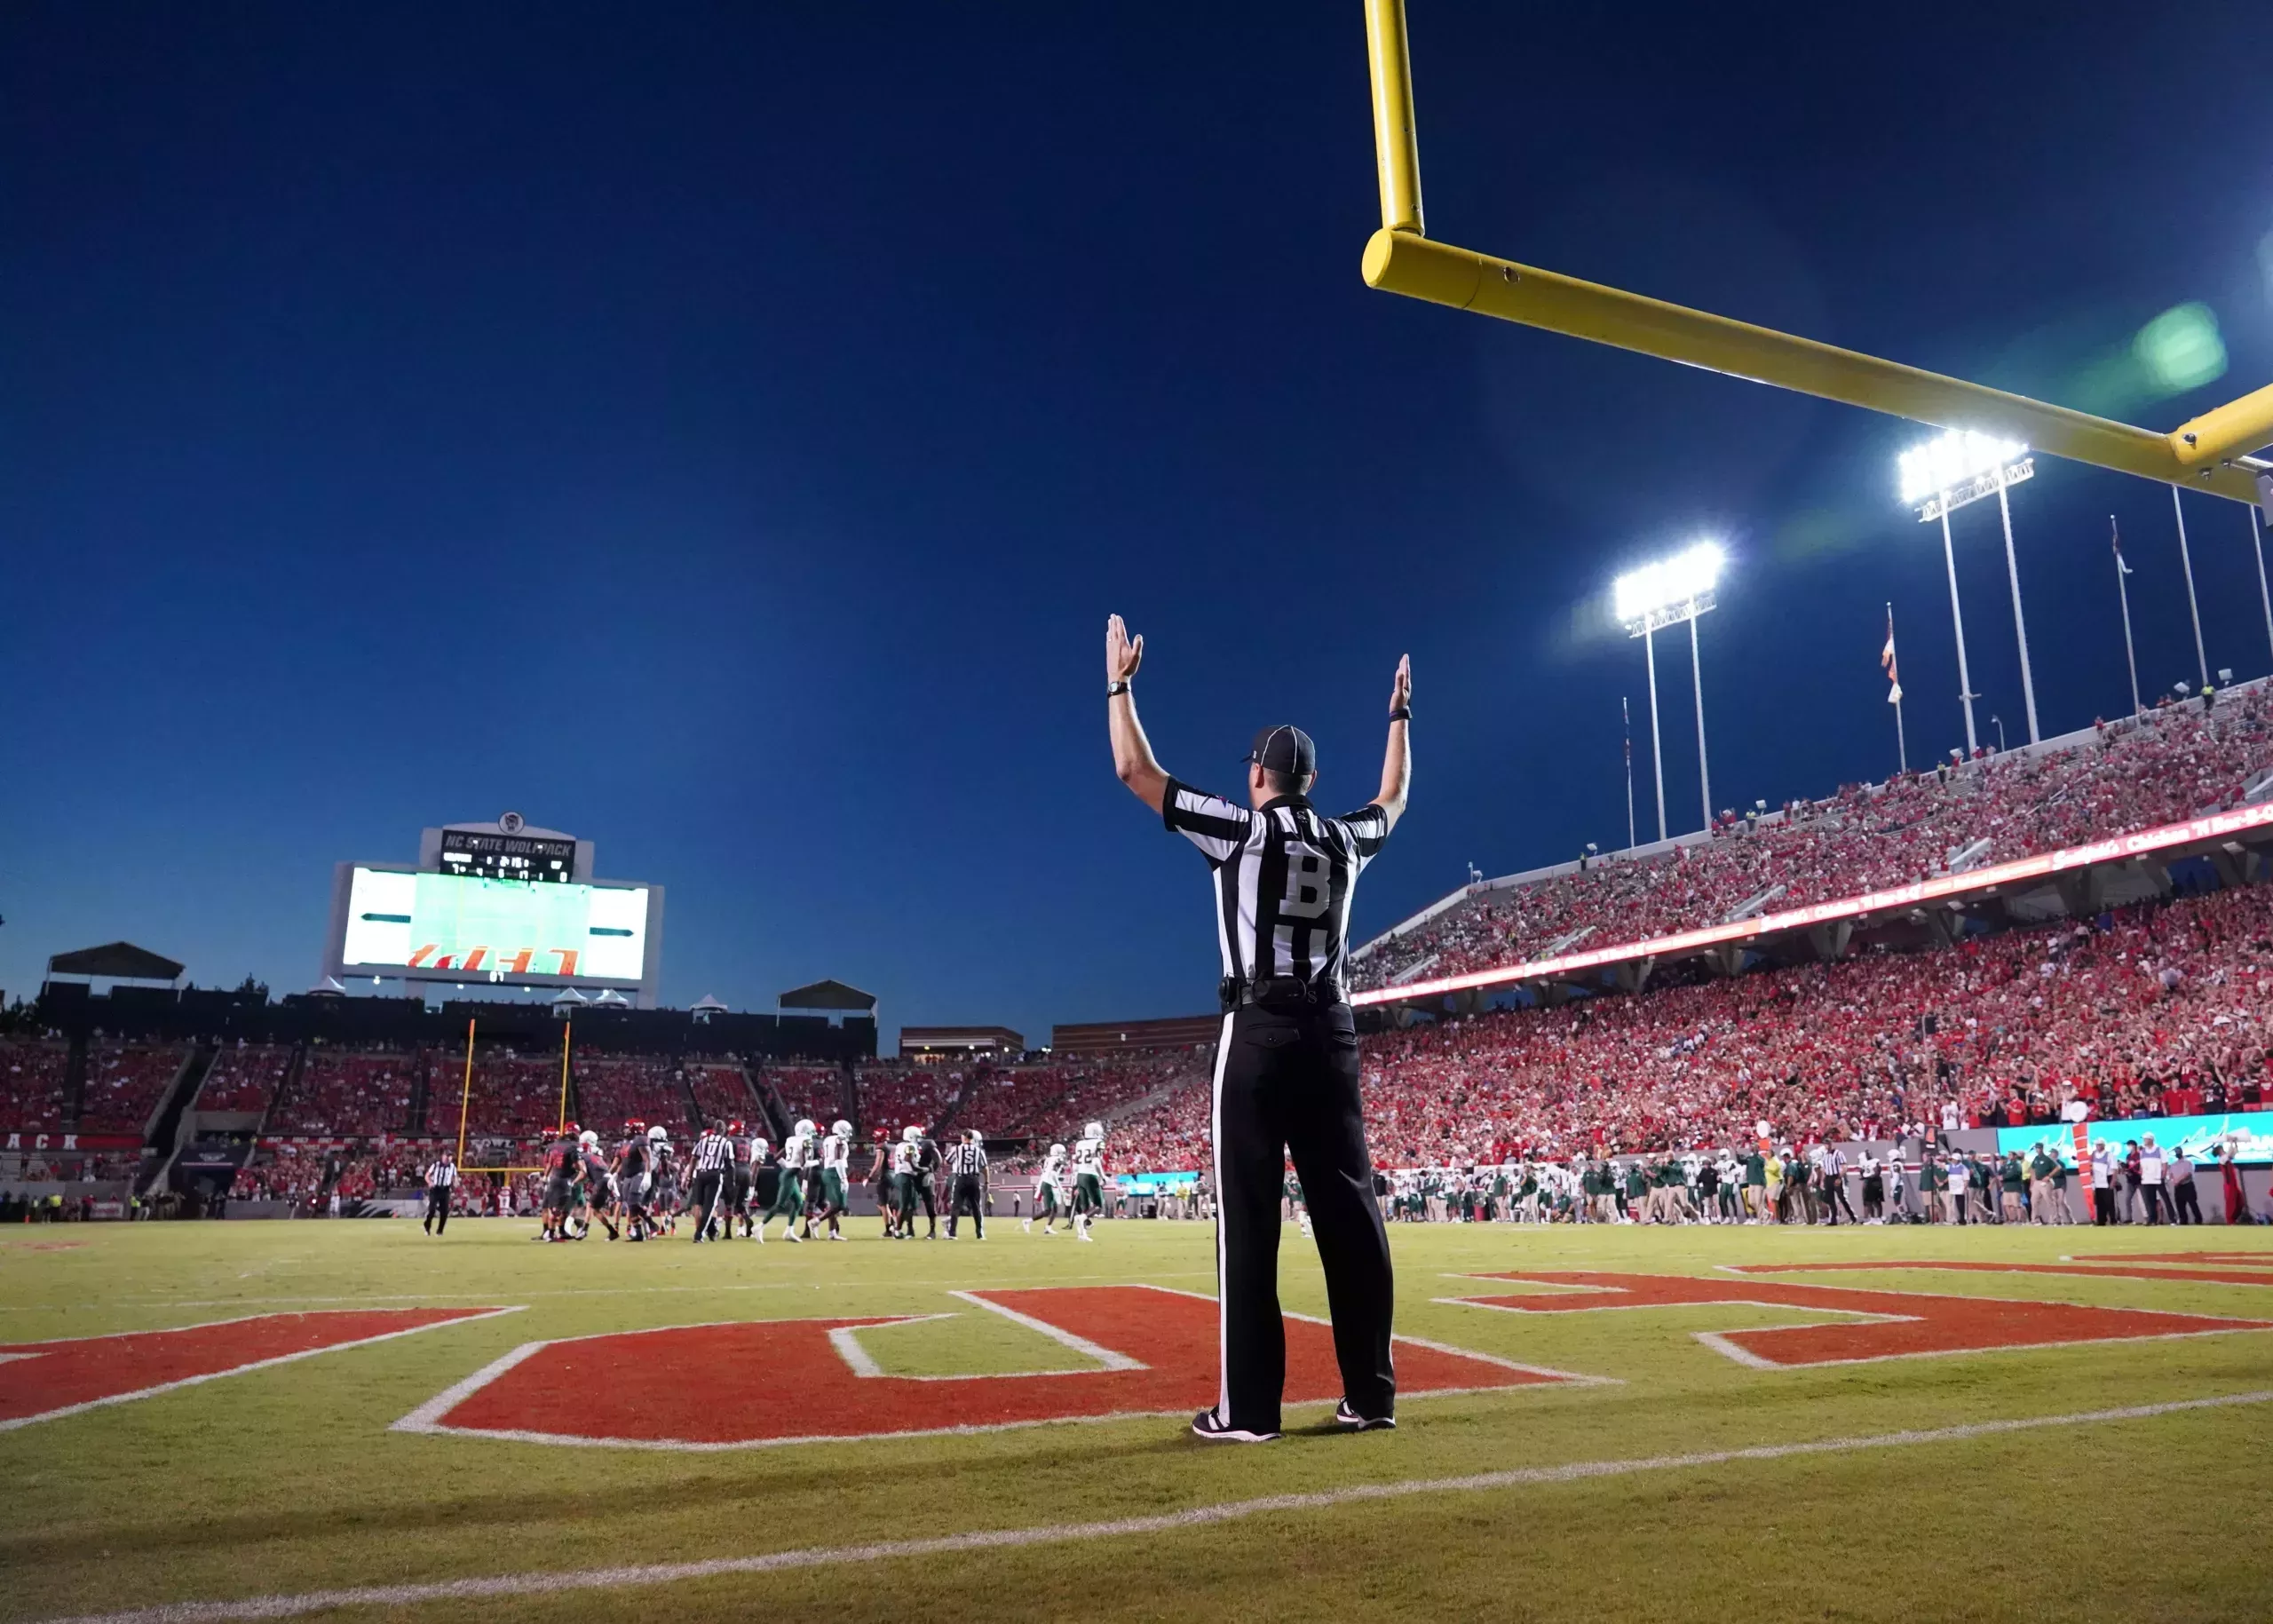 A referee standing in an end zone under a field goal post with their arms raised